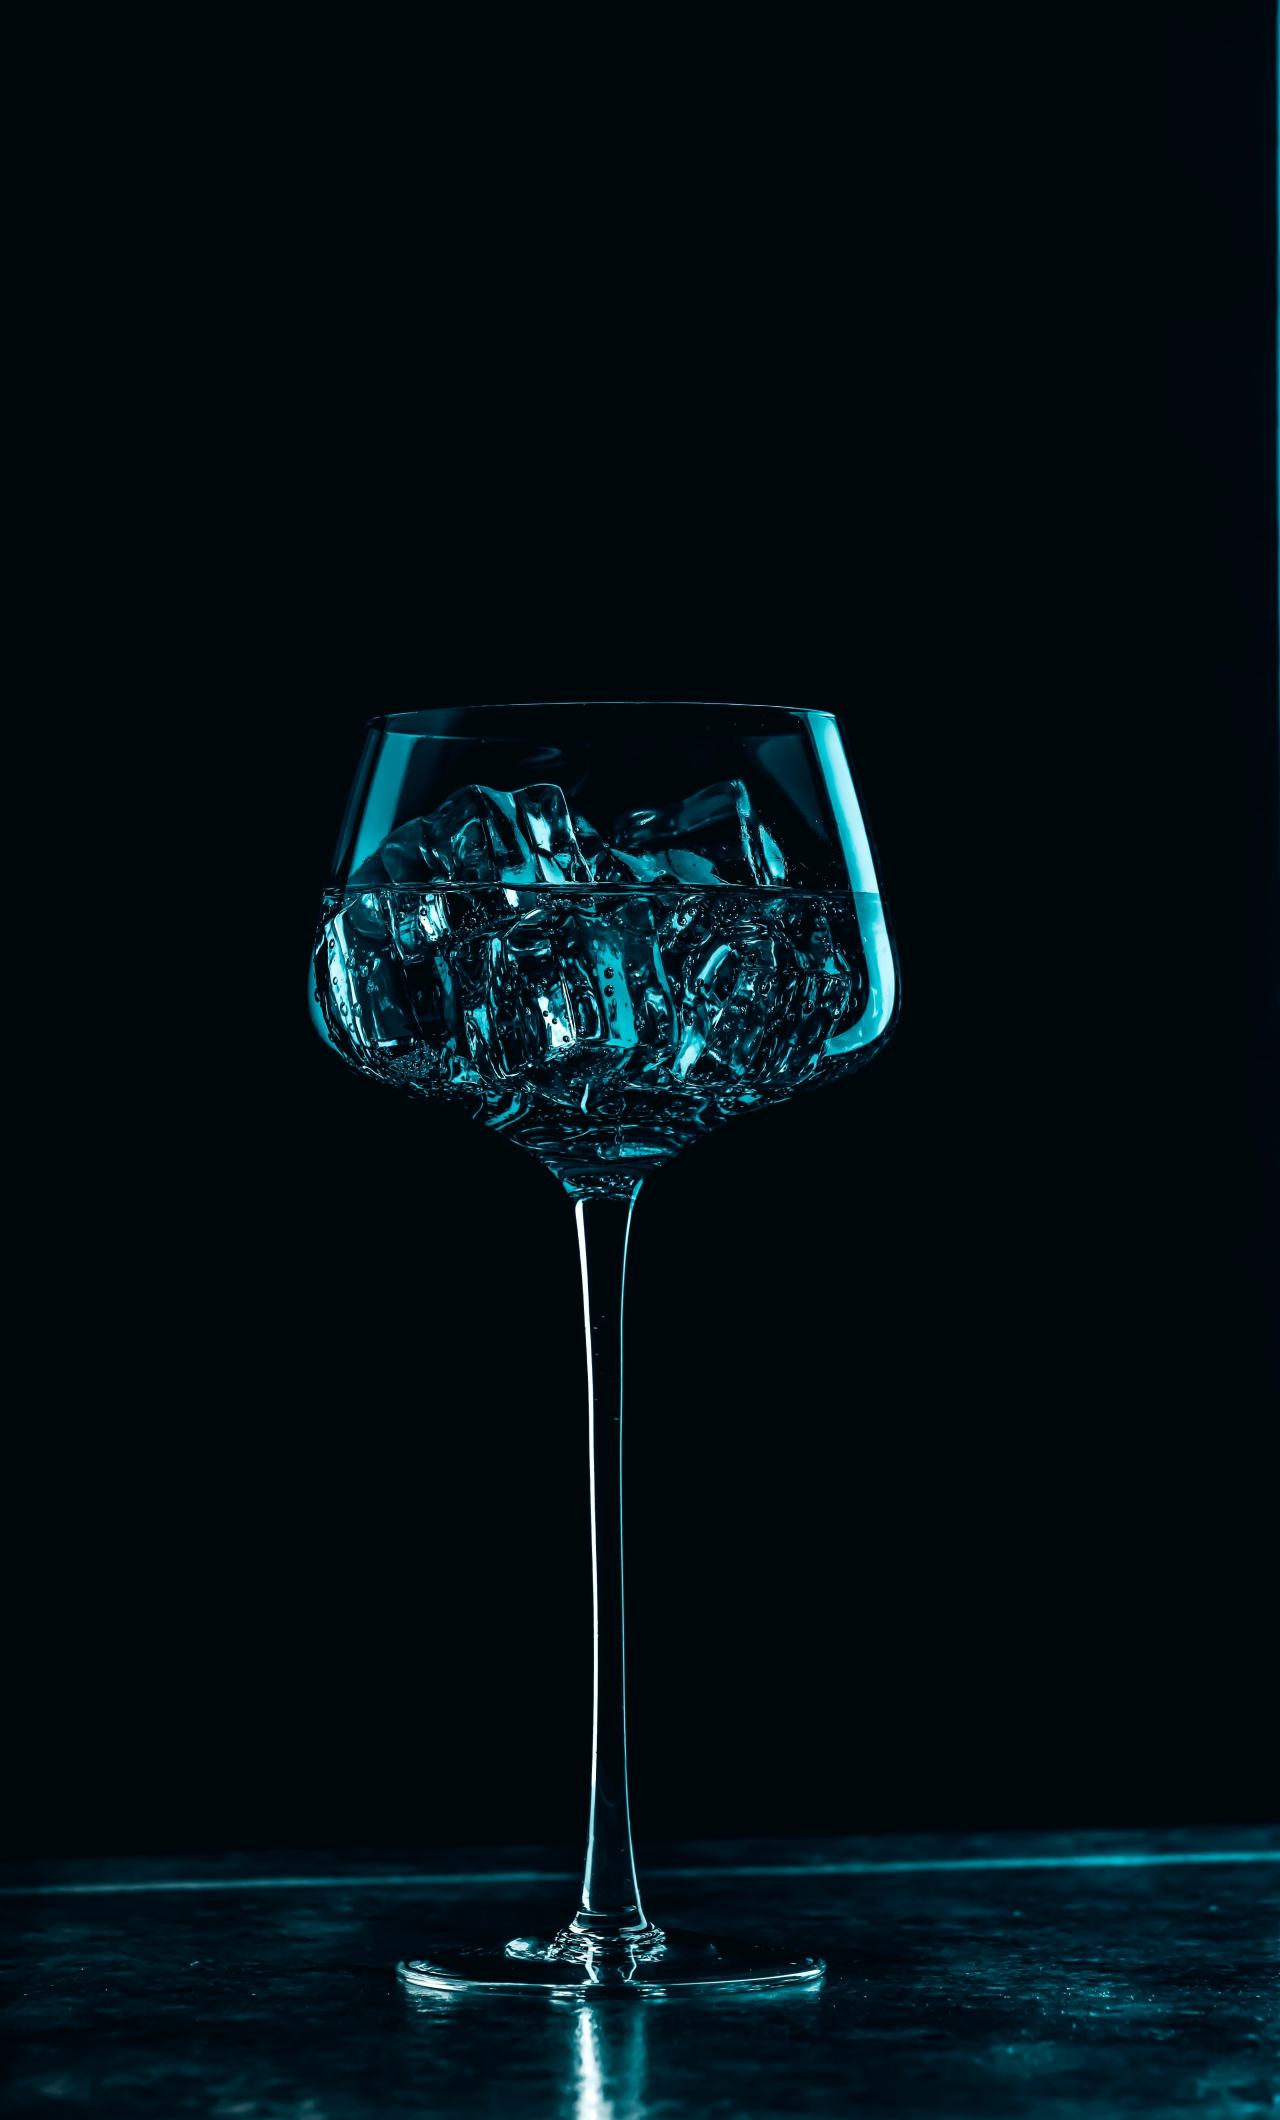 Download wallpaper 1280x2120 glass, wine glass, drink, iphone 6 plus,  1280x2120 hd background, 24824